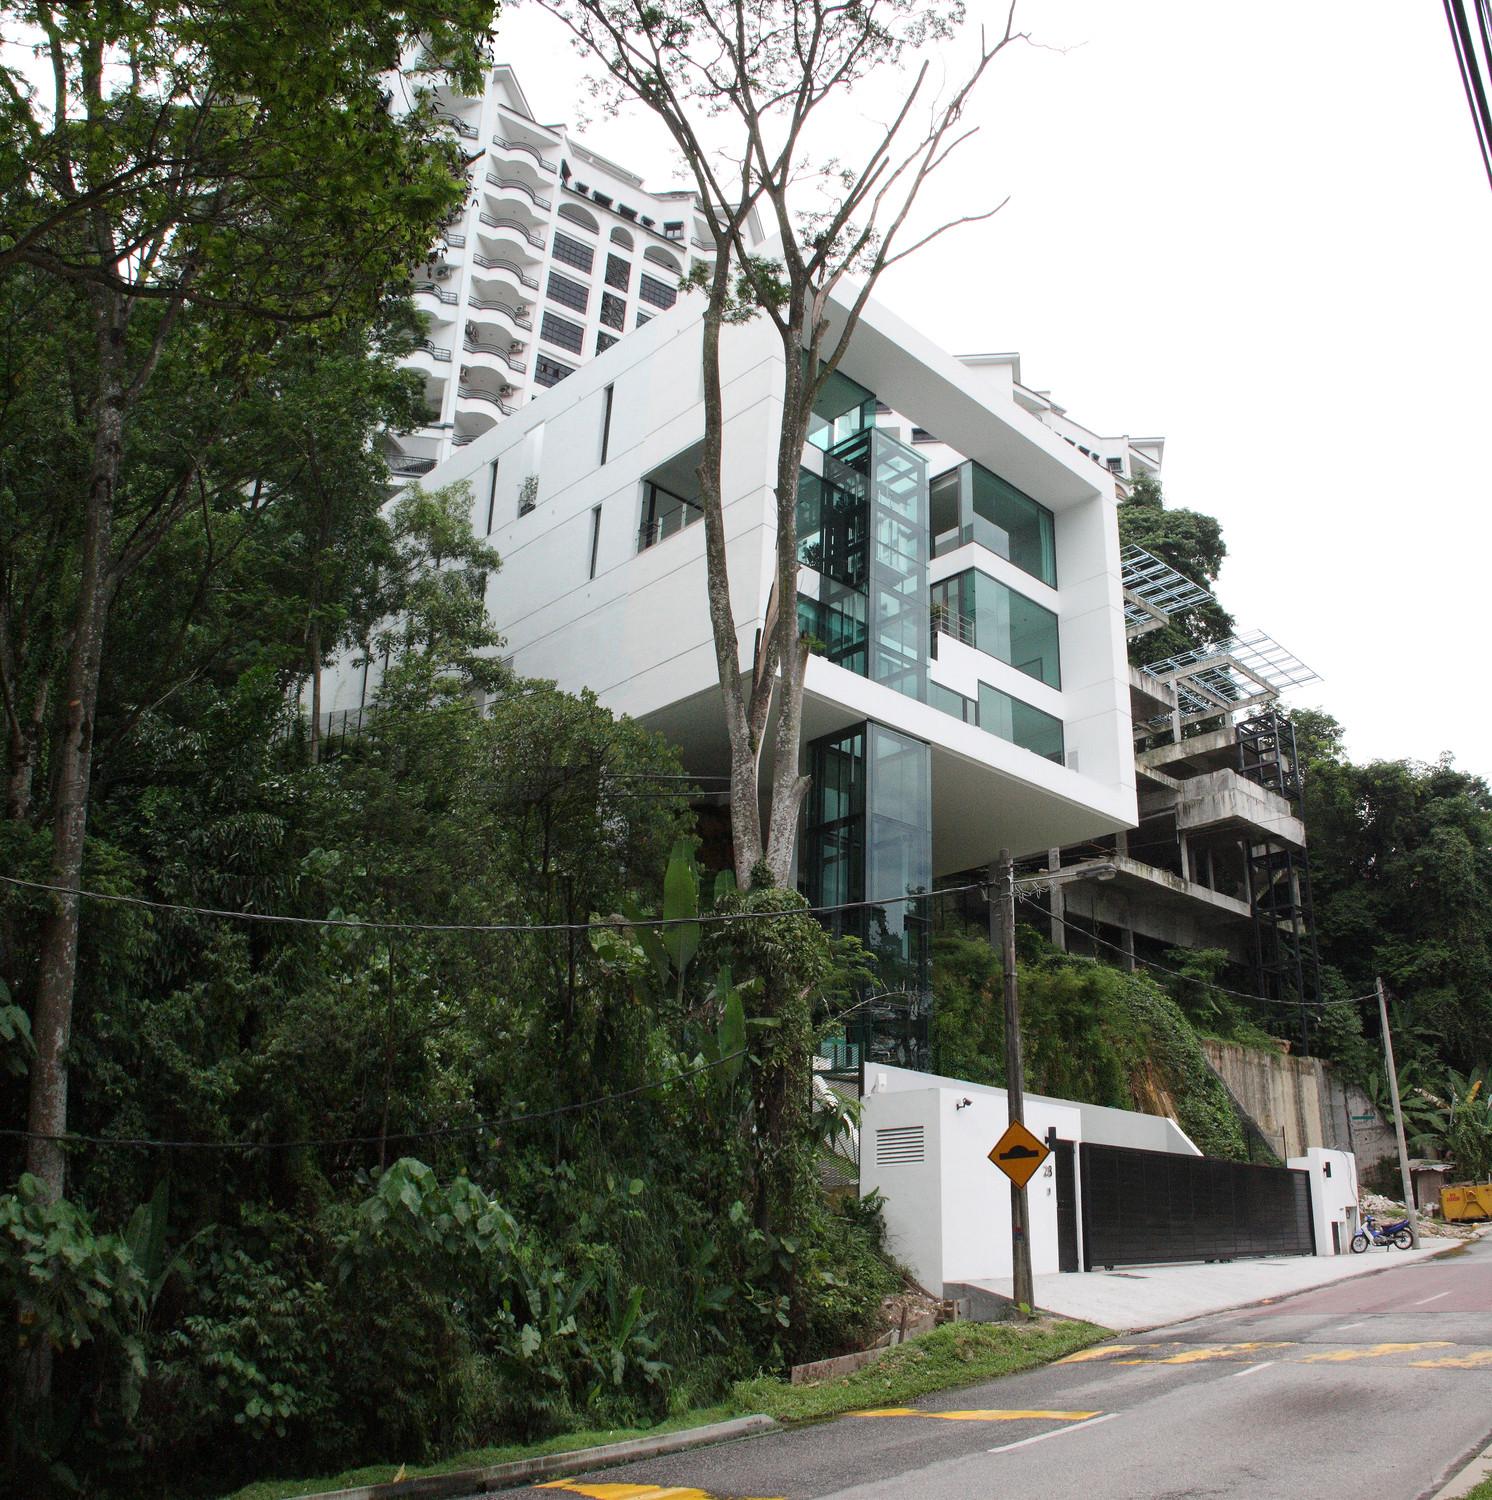 By making the lift core transparent, the building appears to be floating on the slope anchored only at the rear end.